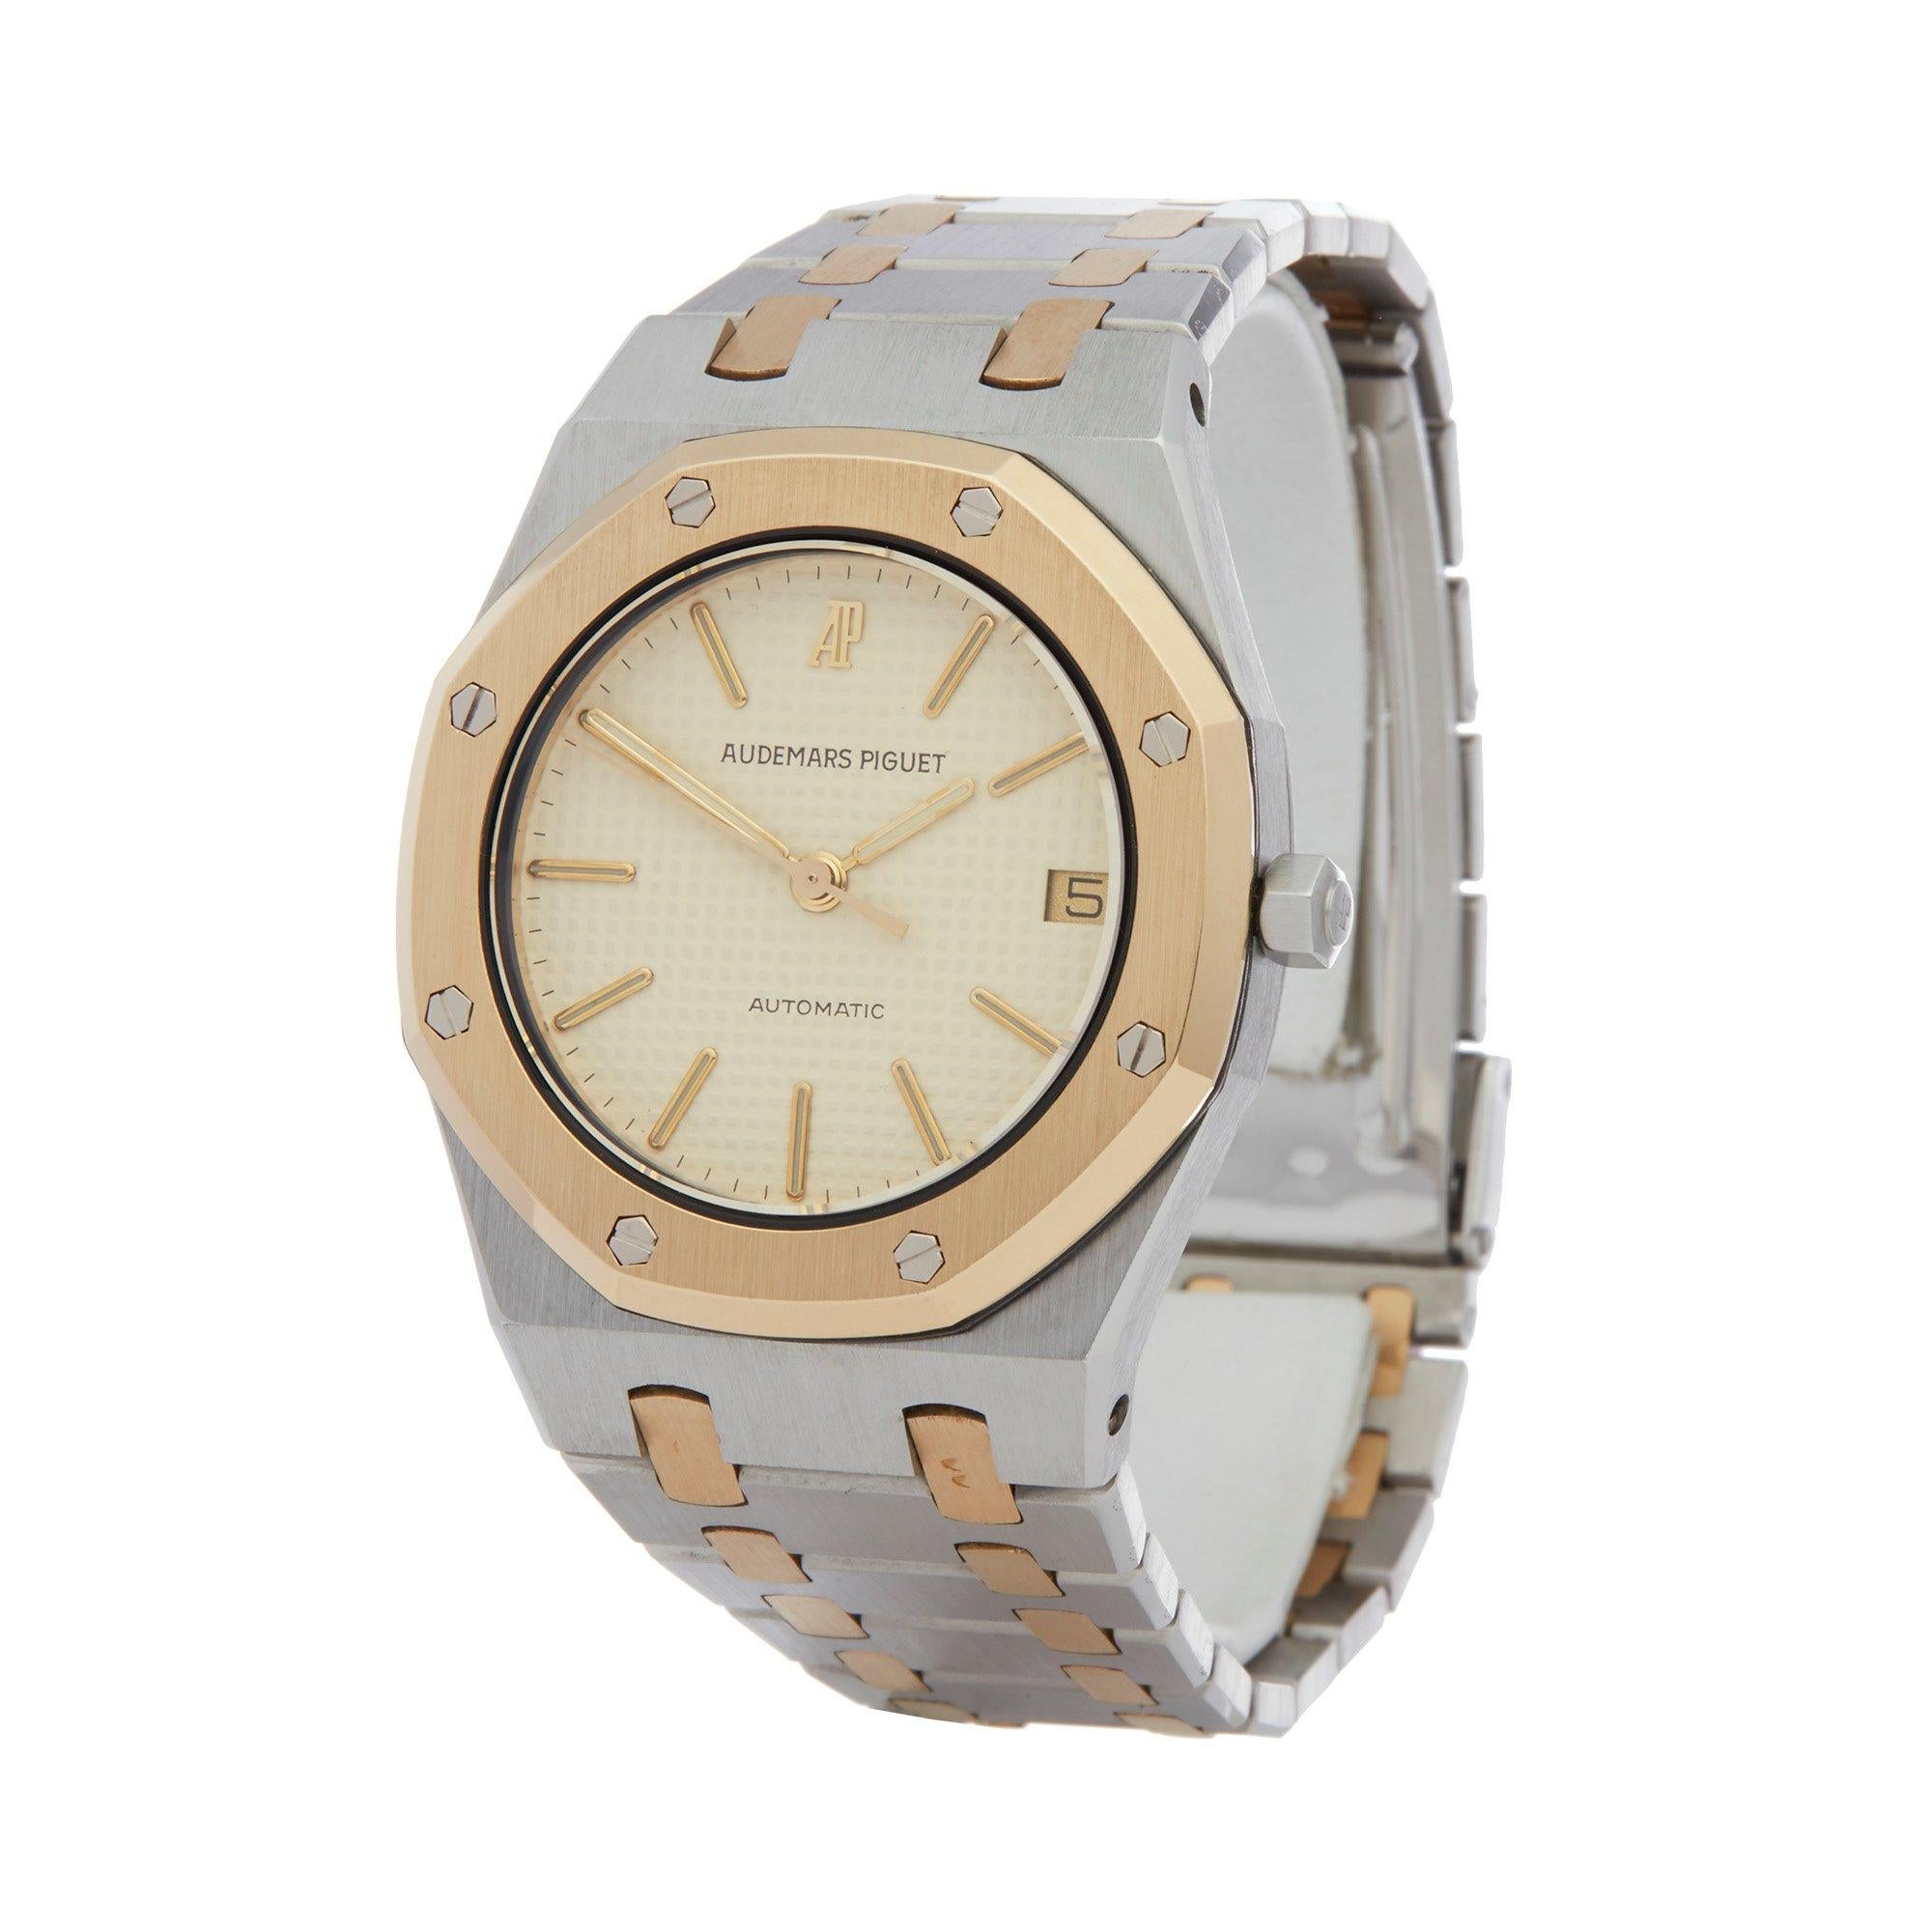 Xupes Reference: W007352
Manufacturer: Audemars Piguet
Model: Royal Oak
Model Variant: 
Model Number: 4100
Age: 1978
Gender: Unisex
Complete With: Xupes Presentation Box
Dial: White Baton
Glass: Sapphire Crystal
Case Size: 35mm
Case Material: